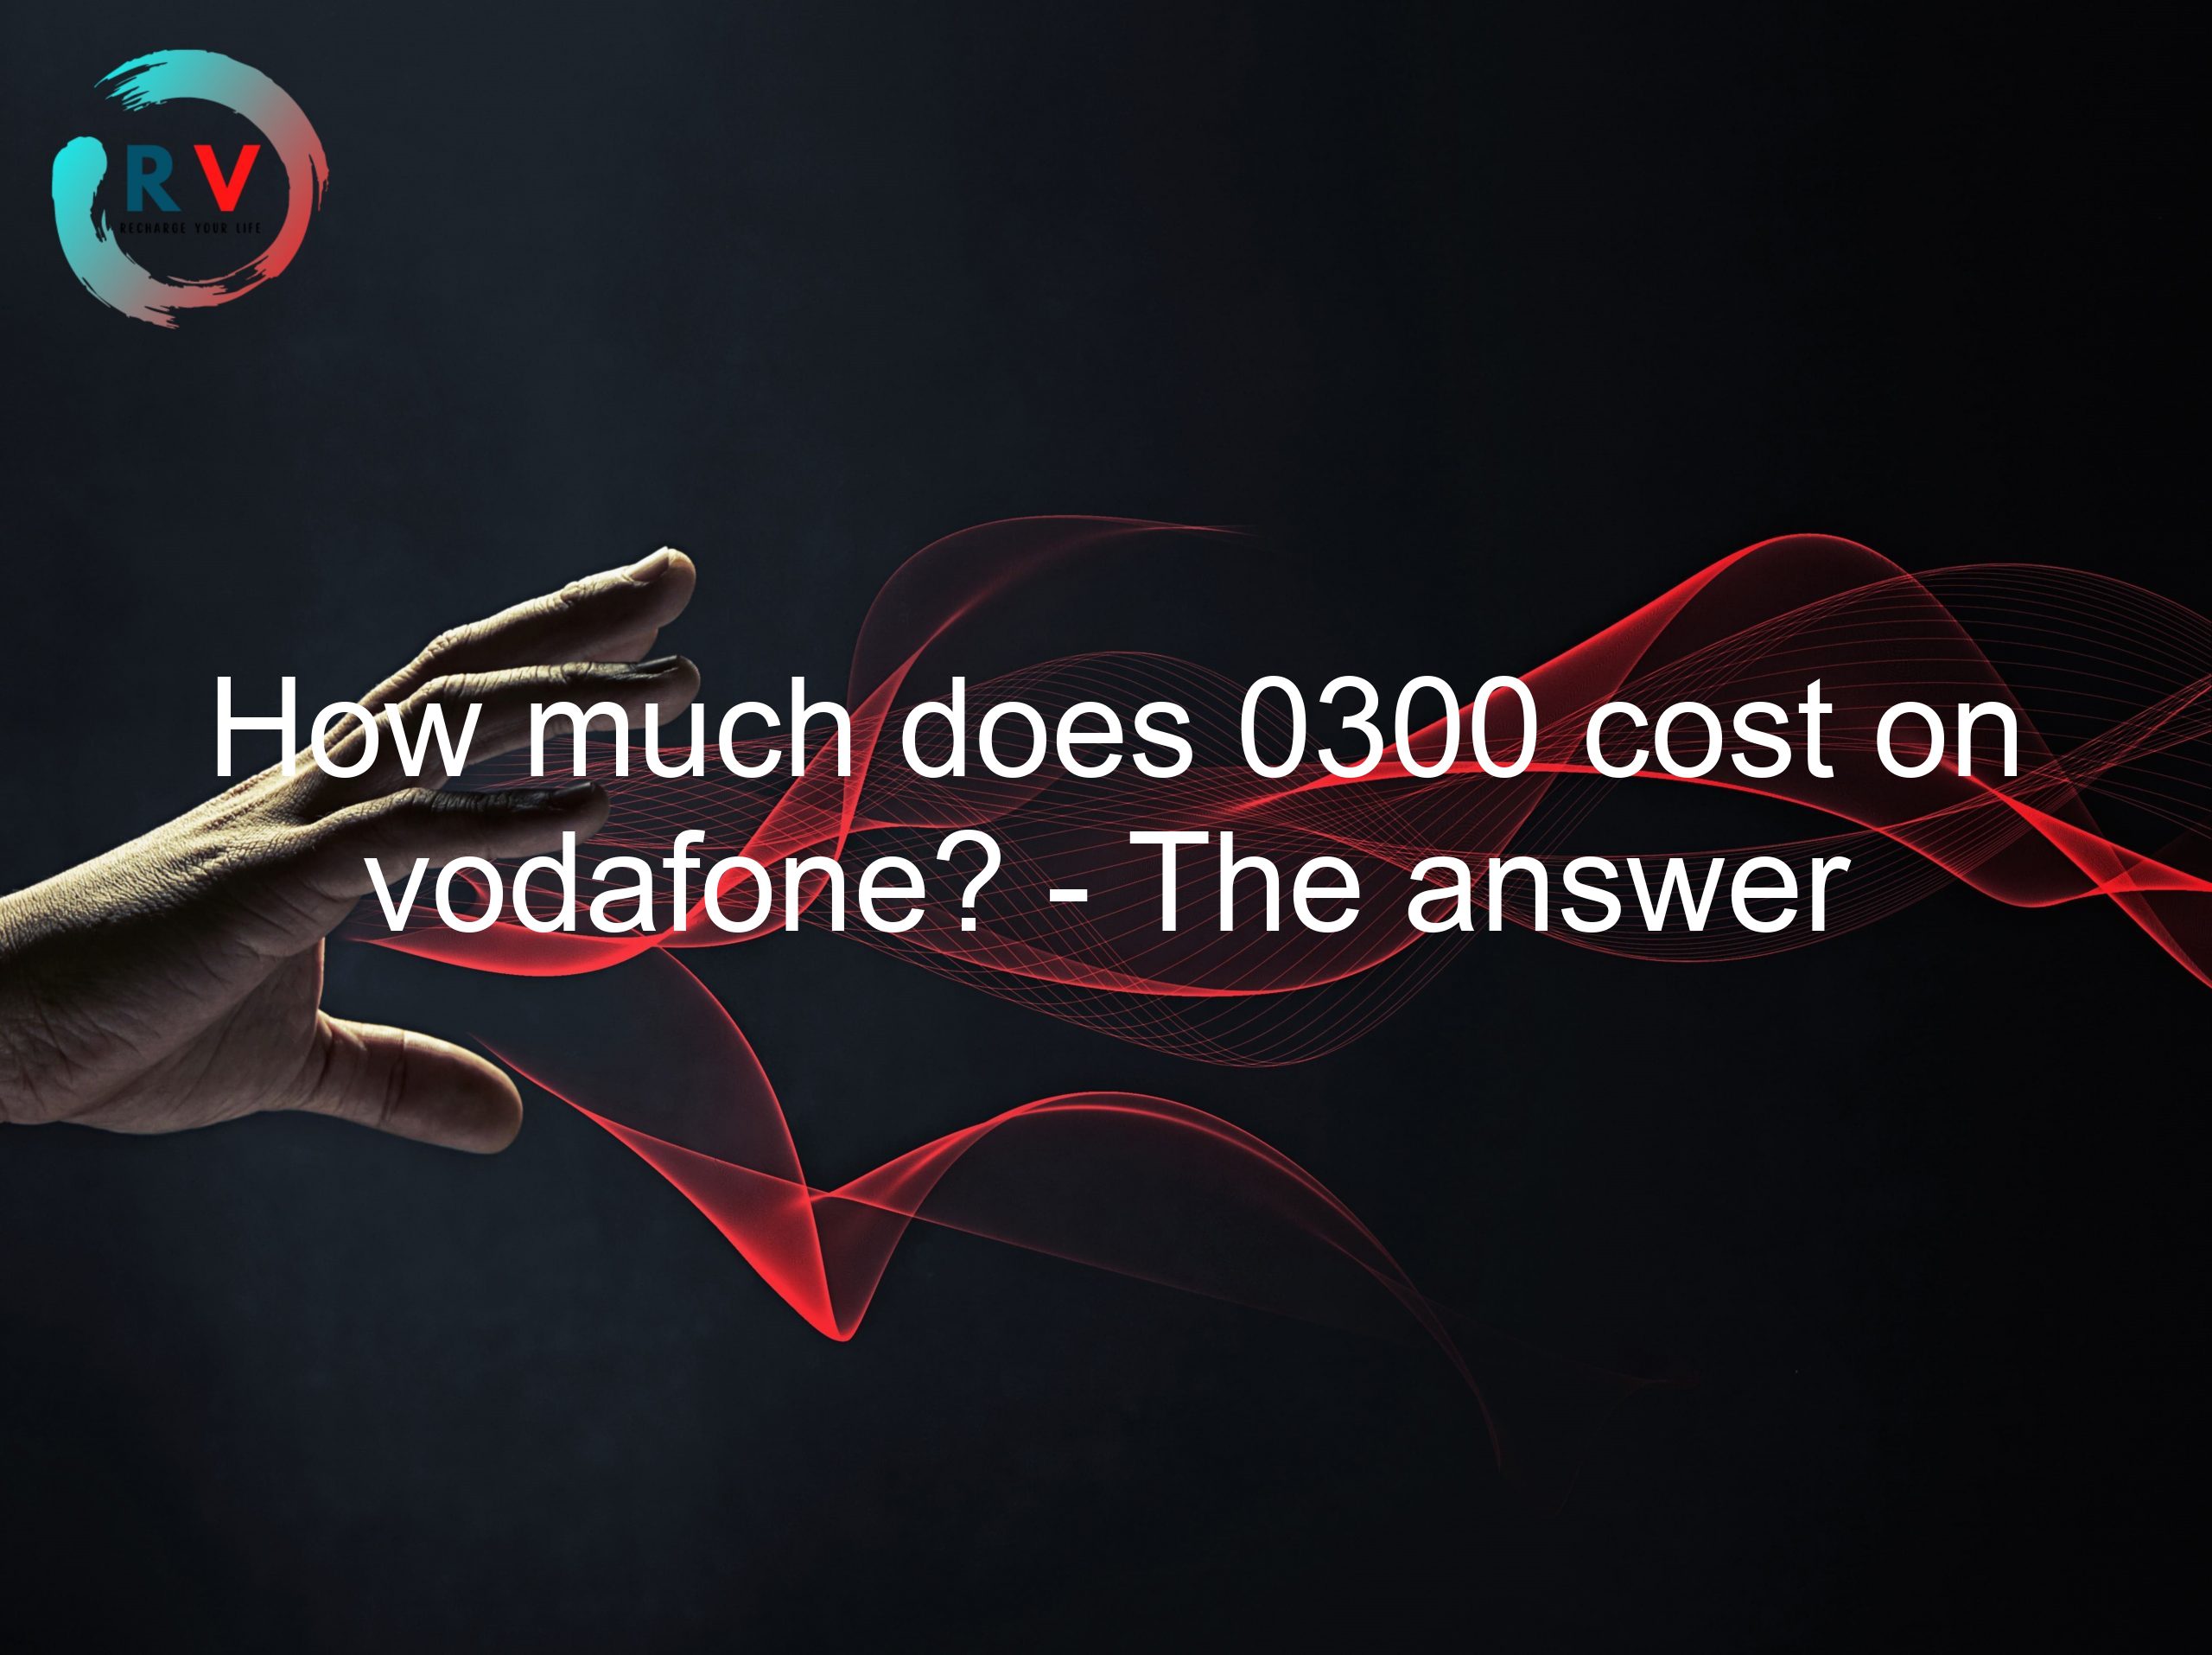 How much does 0300 cost on vodafone? - The answer may surprise you!